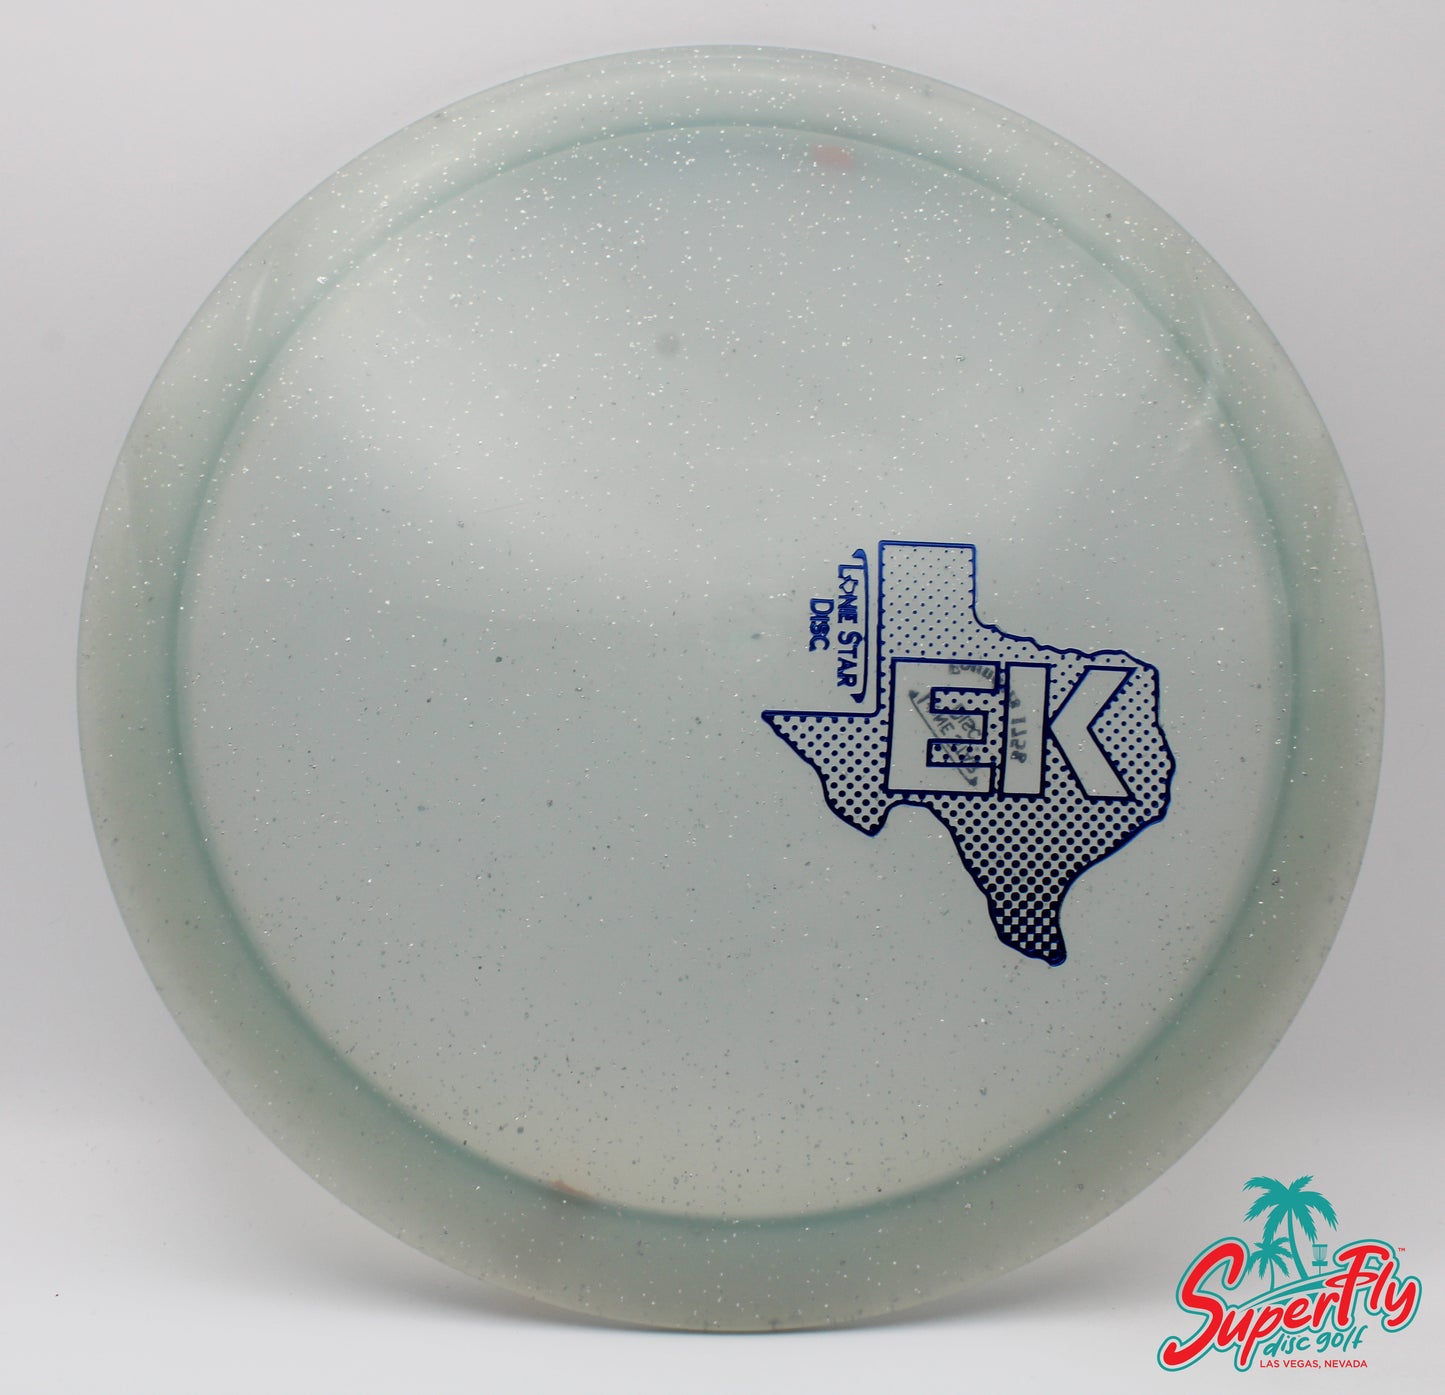 Lone Star Disc Emerson Keith Tour Series Founders Frio